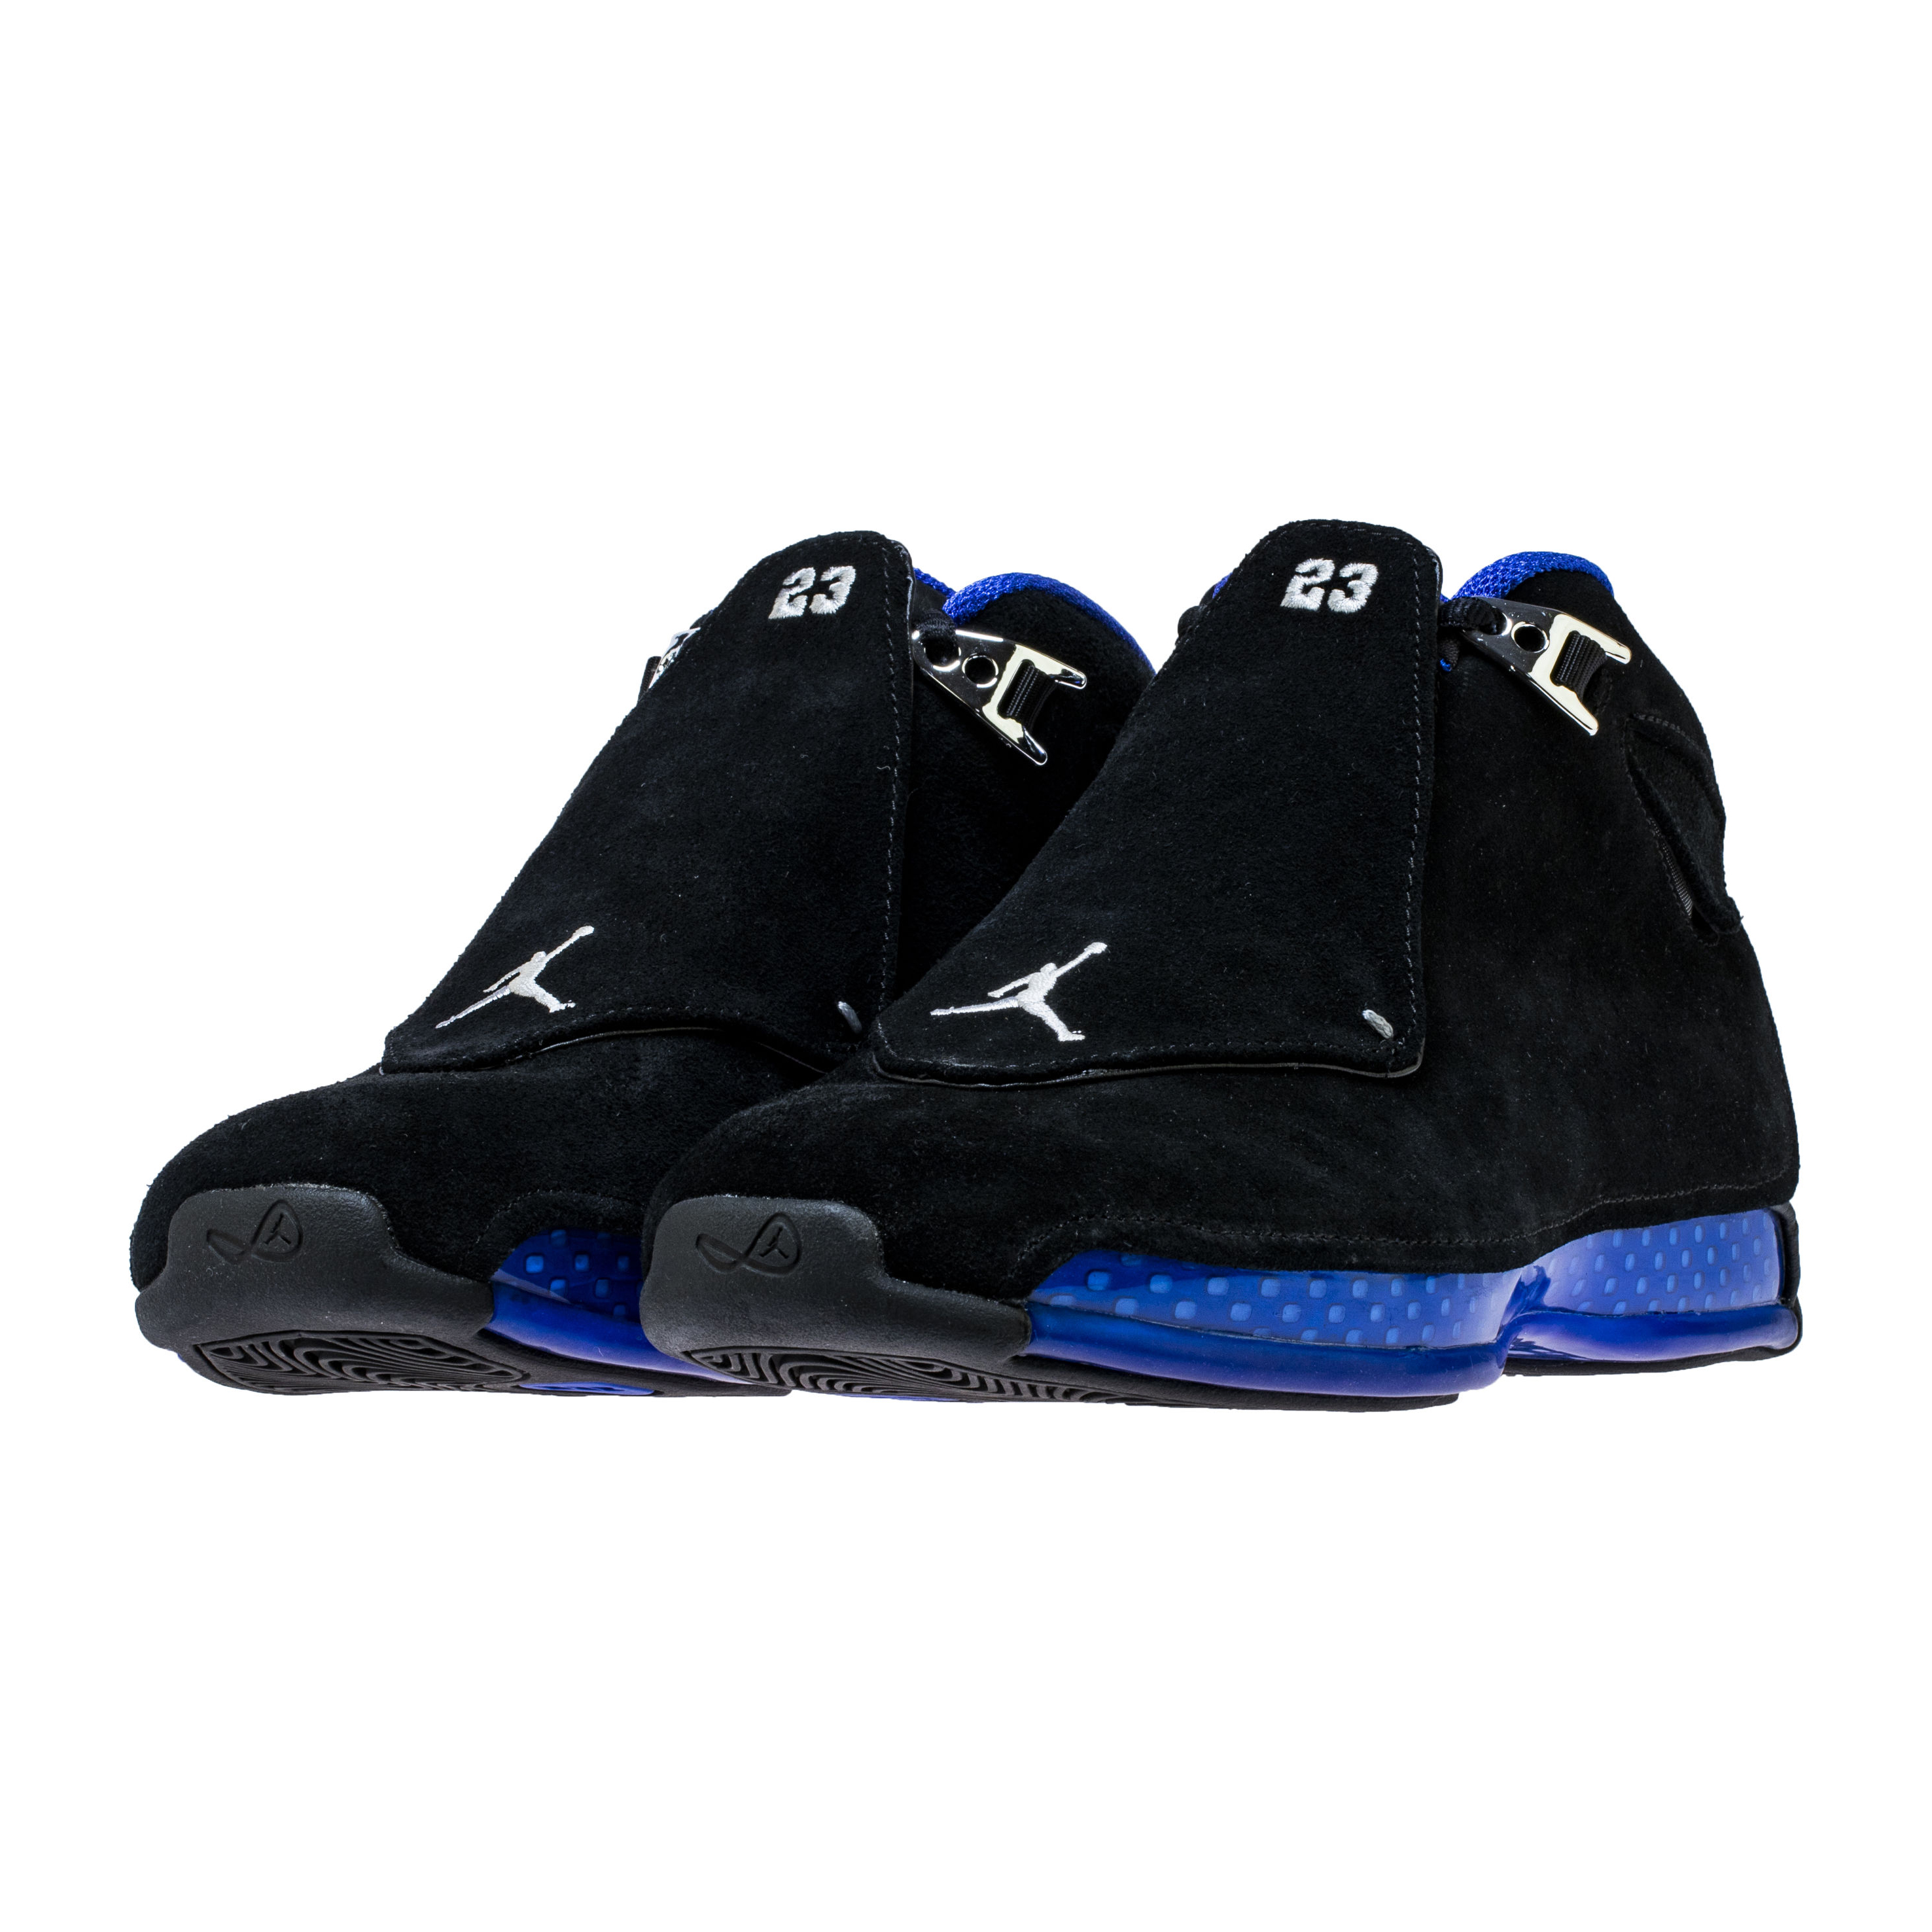 The Air Jordan 18 'Black Sport Royal' Release Date Has Been Moved